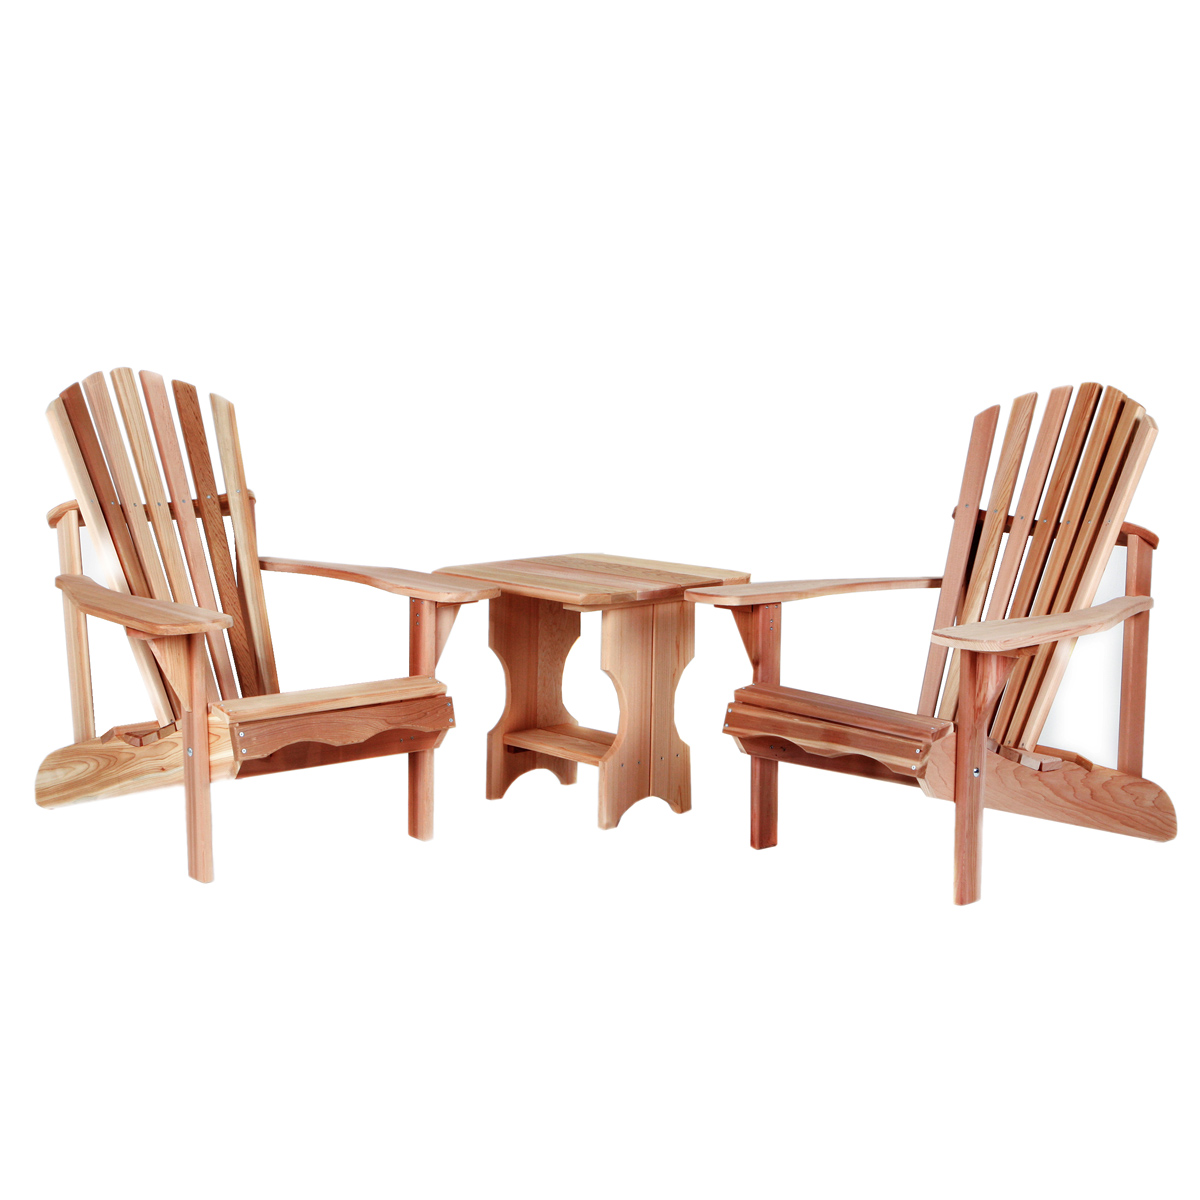 Image of All Things Cedar 3 pc Natural Adirondack Chair Set